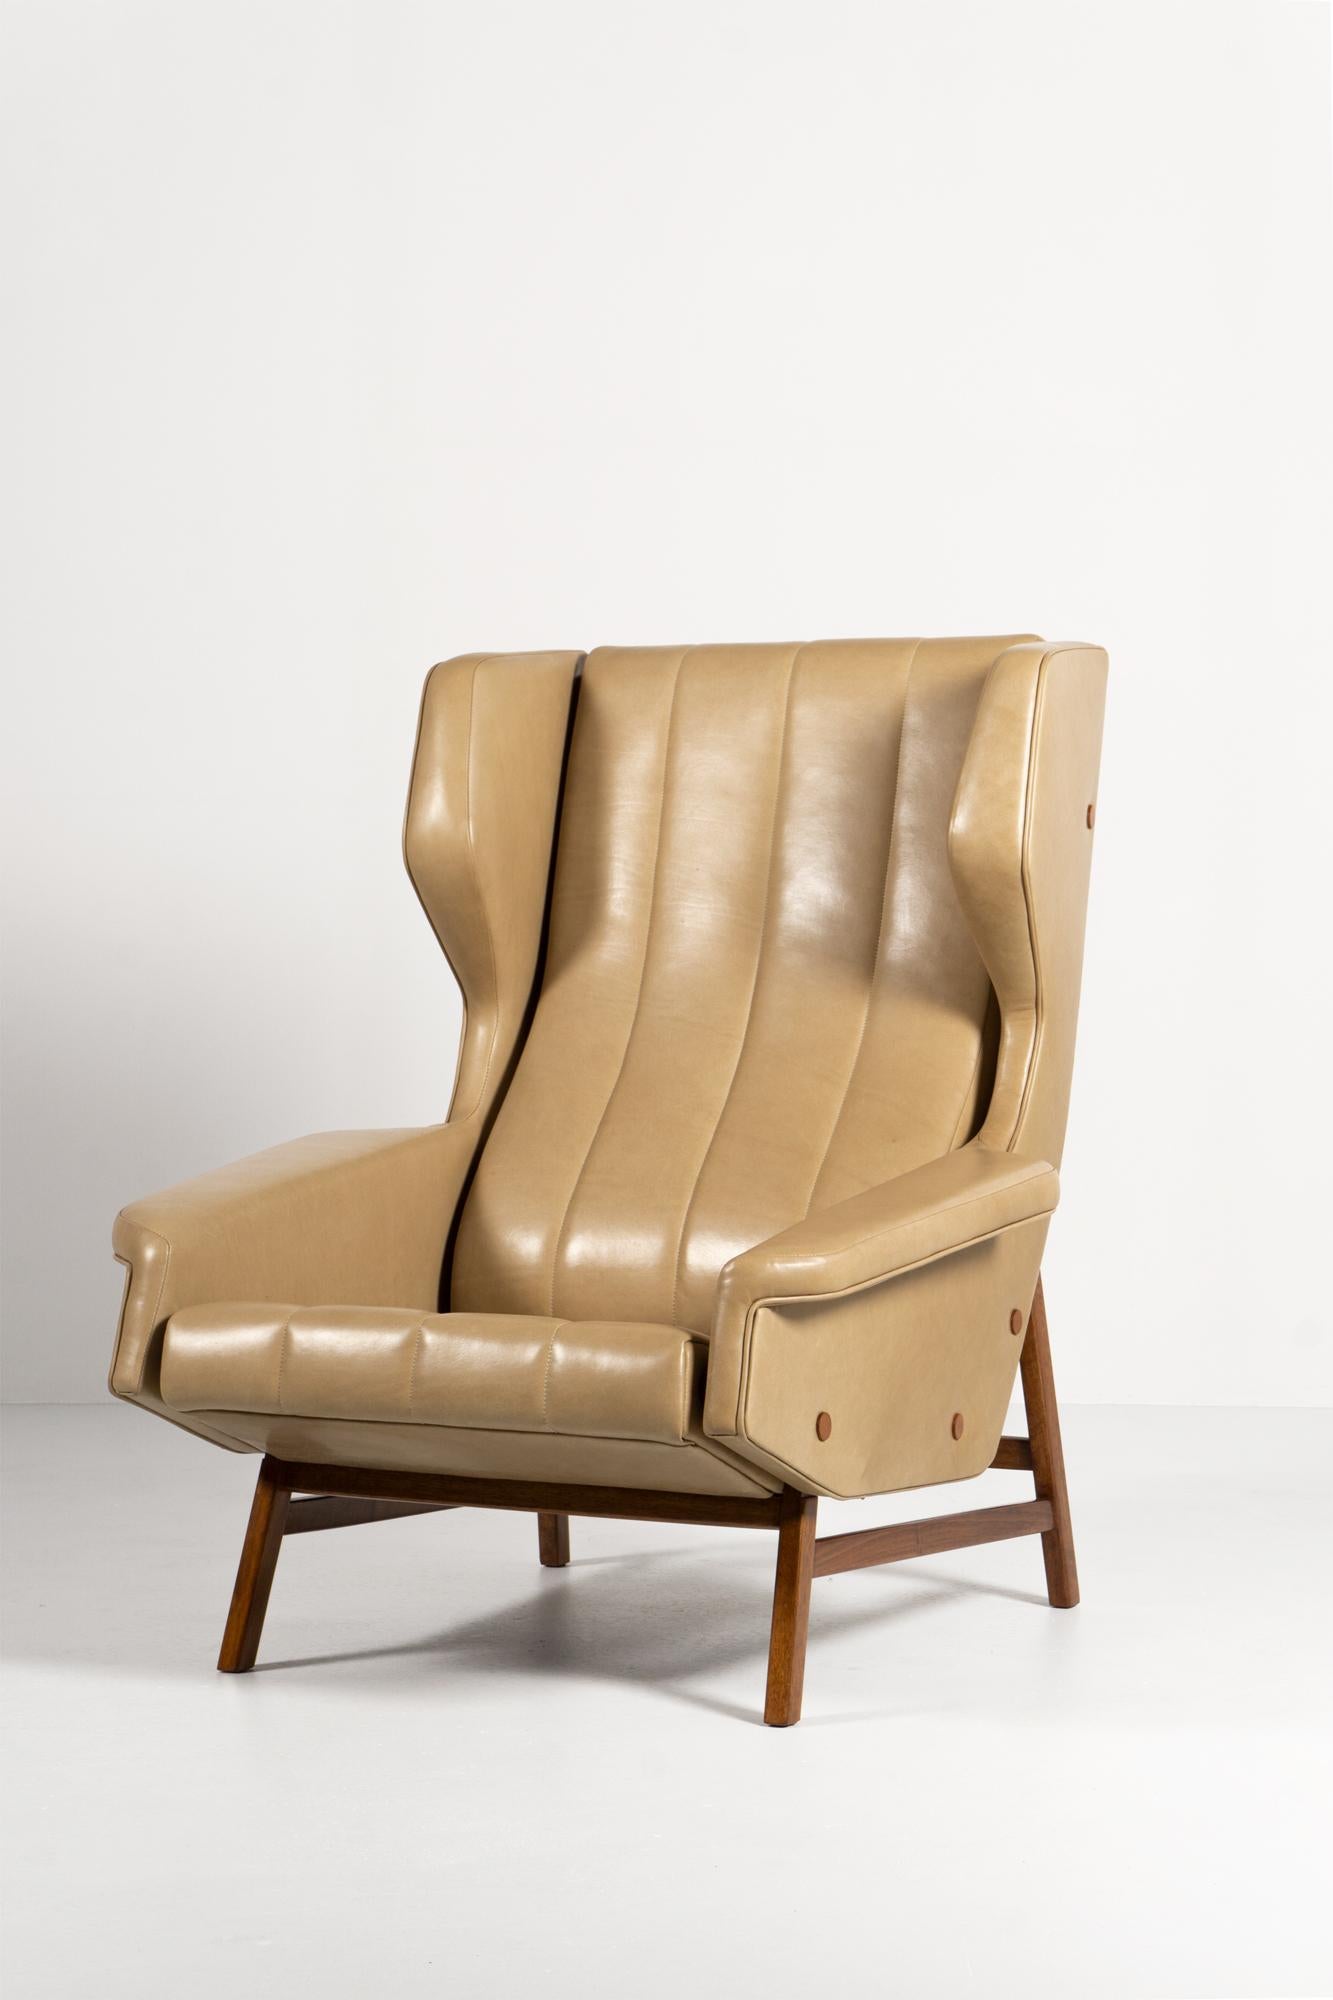 This high quality made wing chair with high back and beautiful details was designed by Gianfranco Frattini in 1957 and is known as model 877.
The construction is made of walnut wood, the leather cover has been renewed, the upholstery made in the